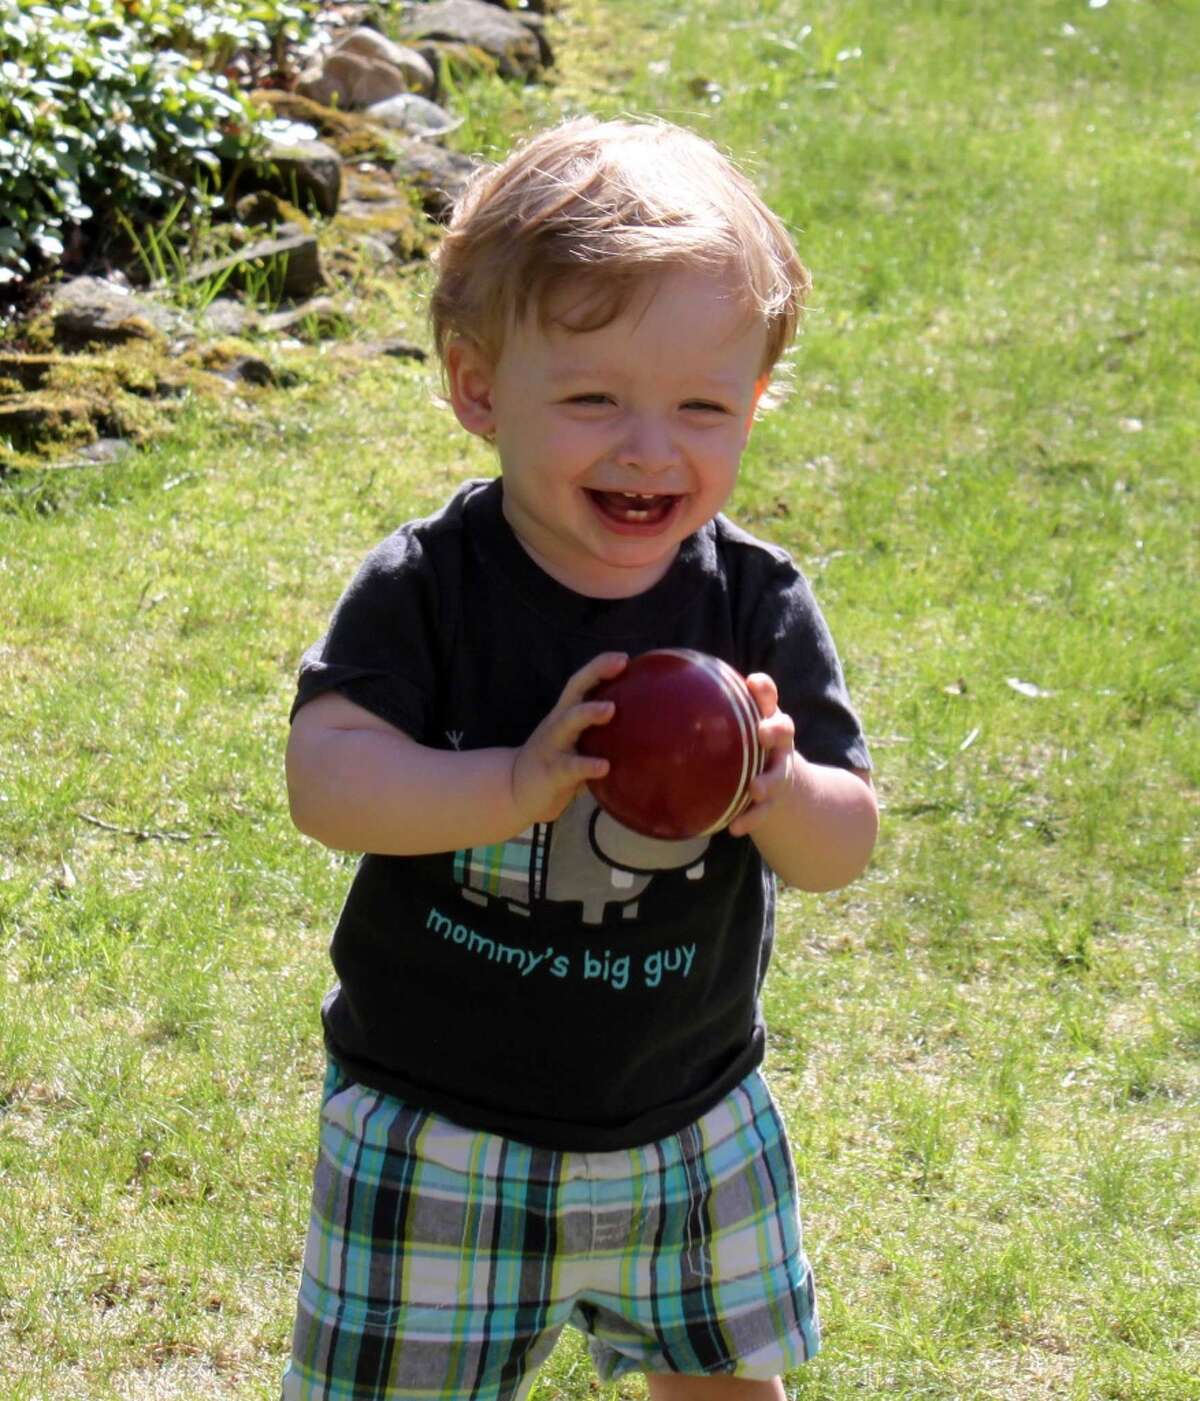 Benjamin Seitz, the 15-month-old son of Kyle and Lindsey Rogers-Seitz of Ridgefield, died July 7 after his father left him in the car for what police called "an extended period of time."